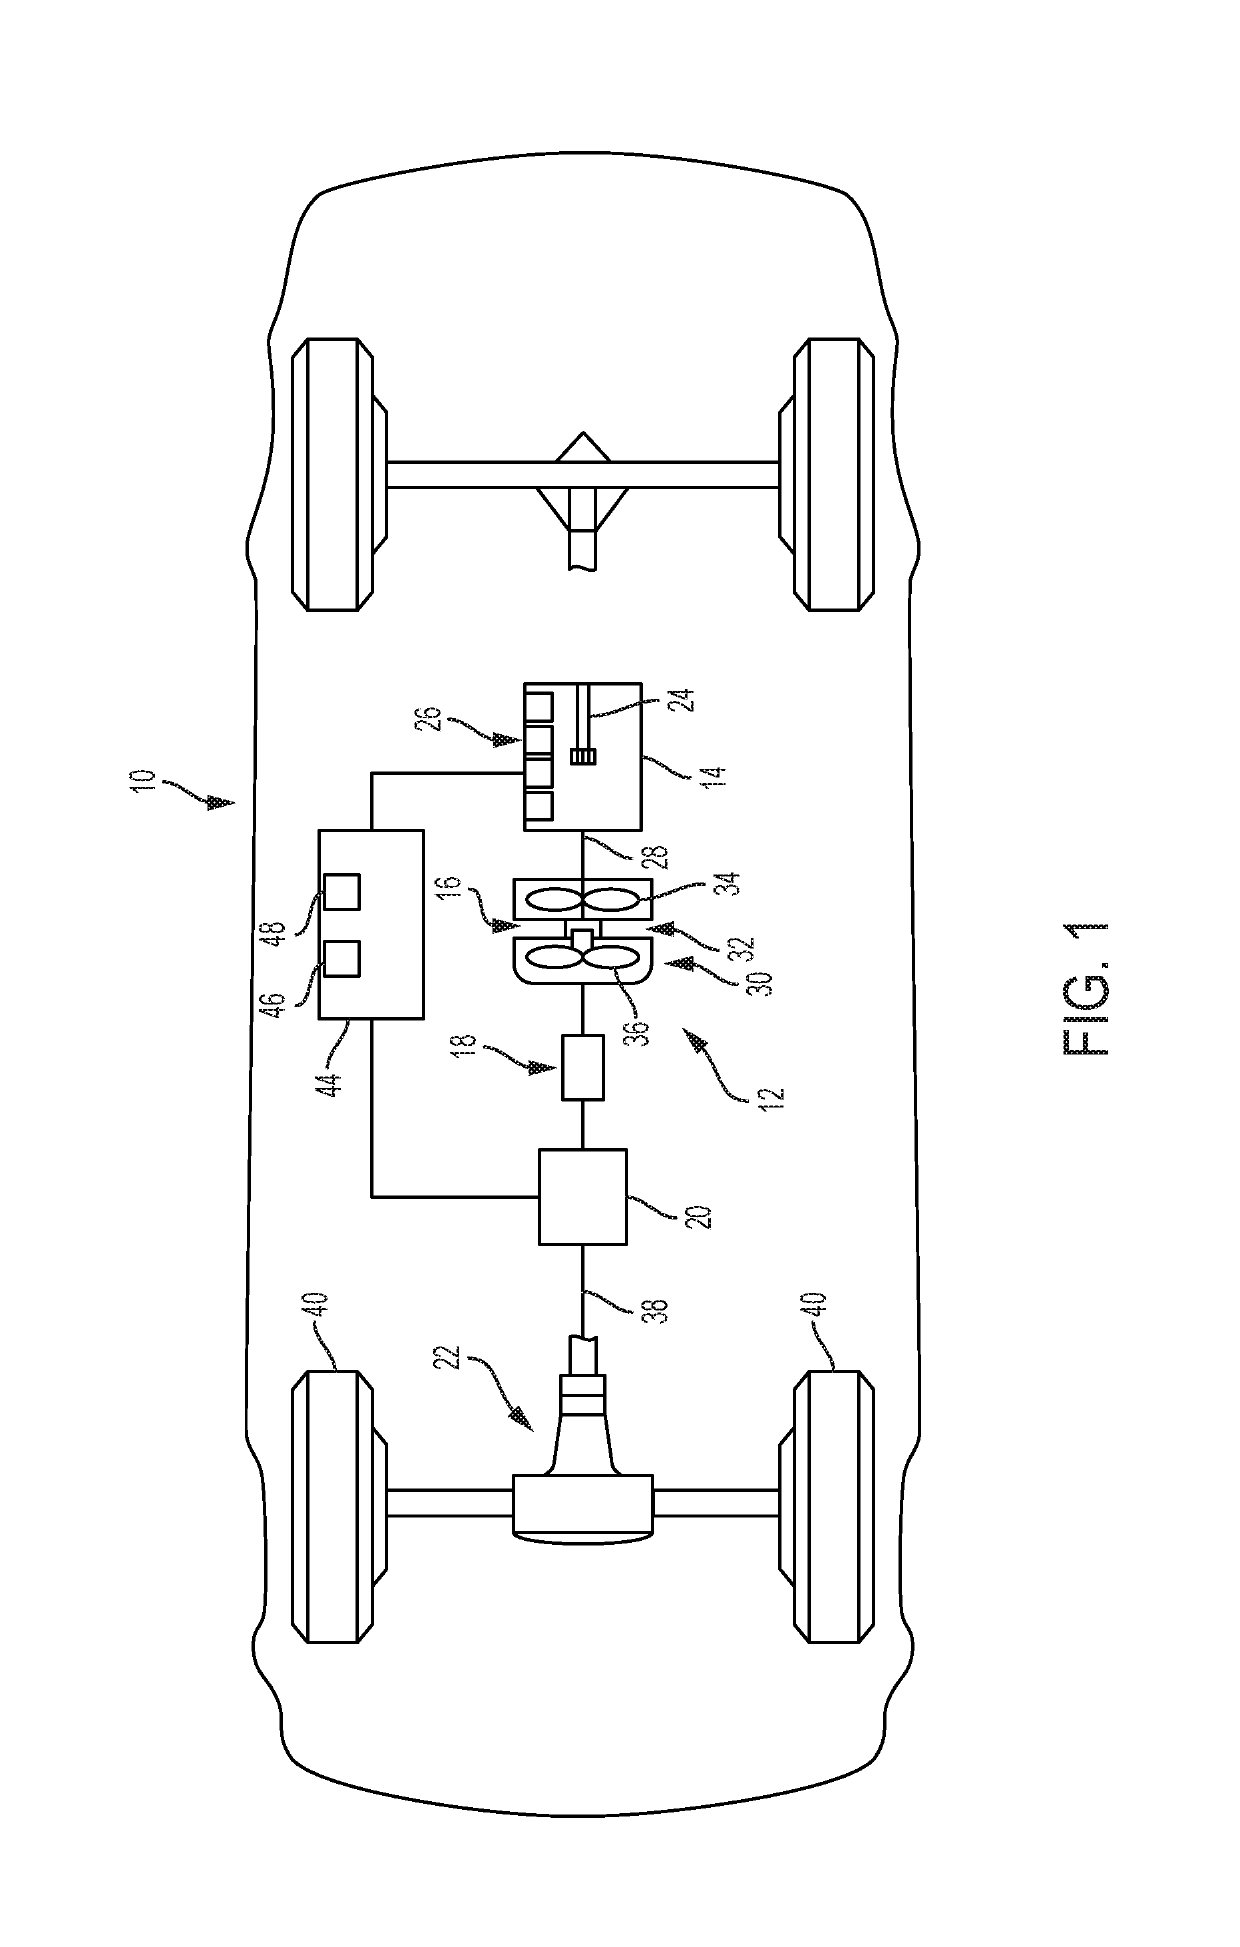 Method and system for controlling a vehicle propulsion system